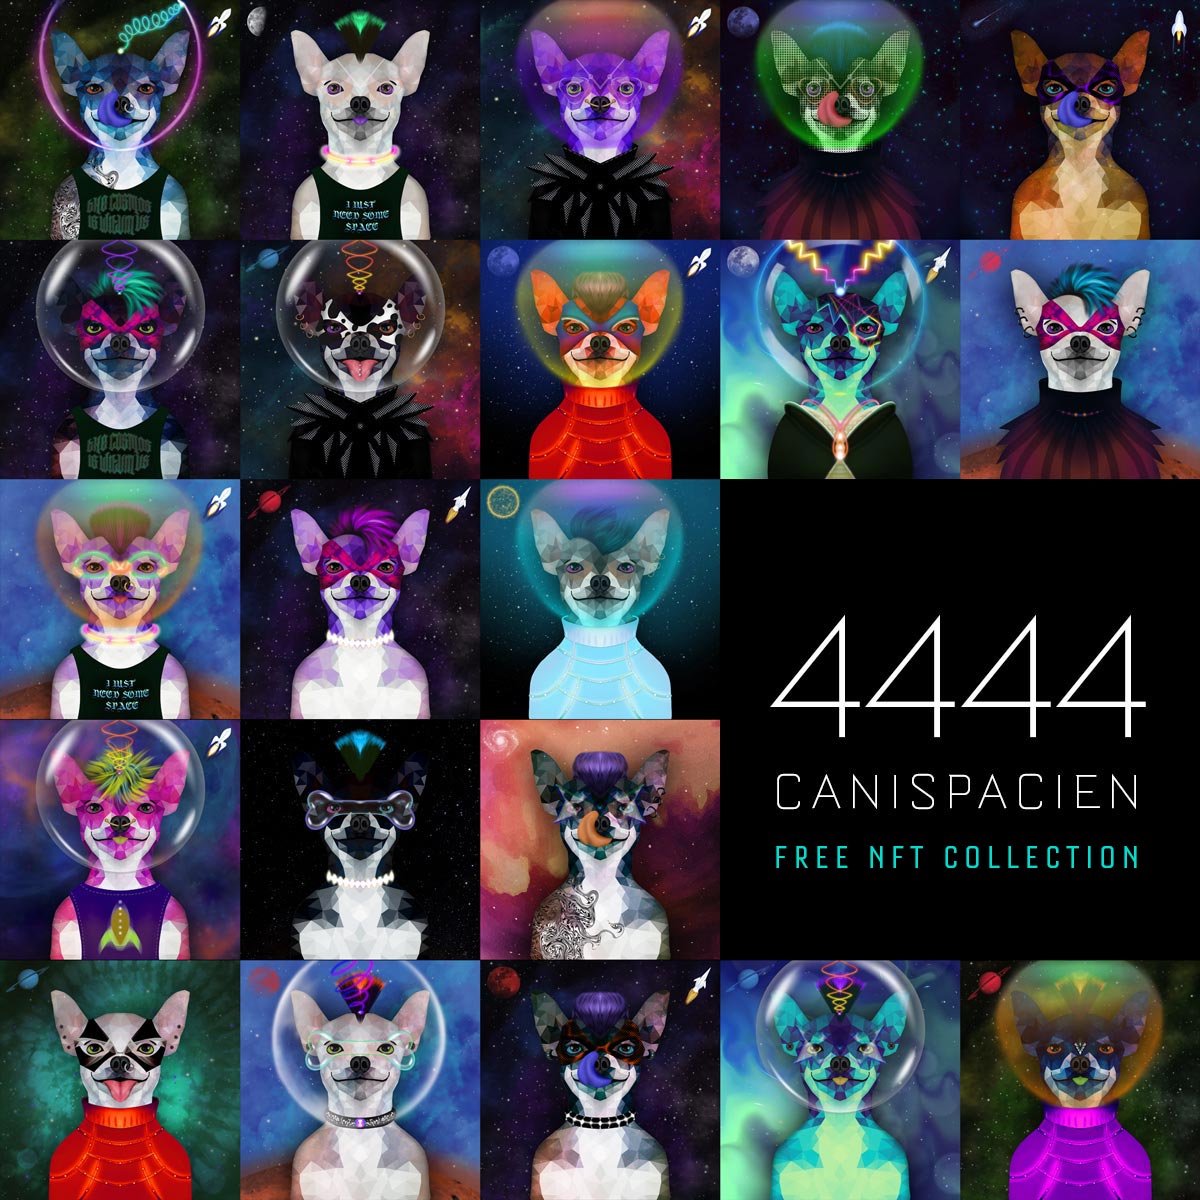 CaniSpacien, a “space dog” inspired NFT collection